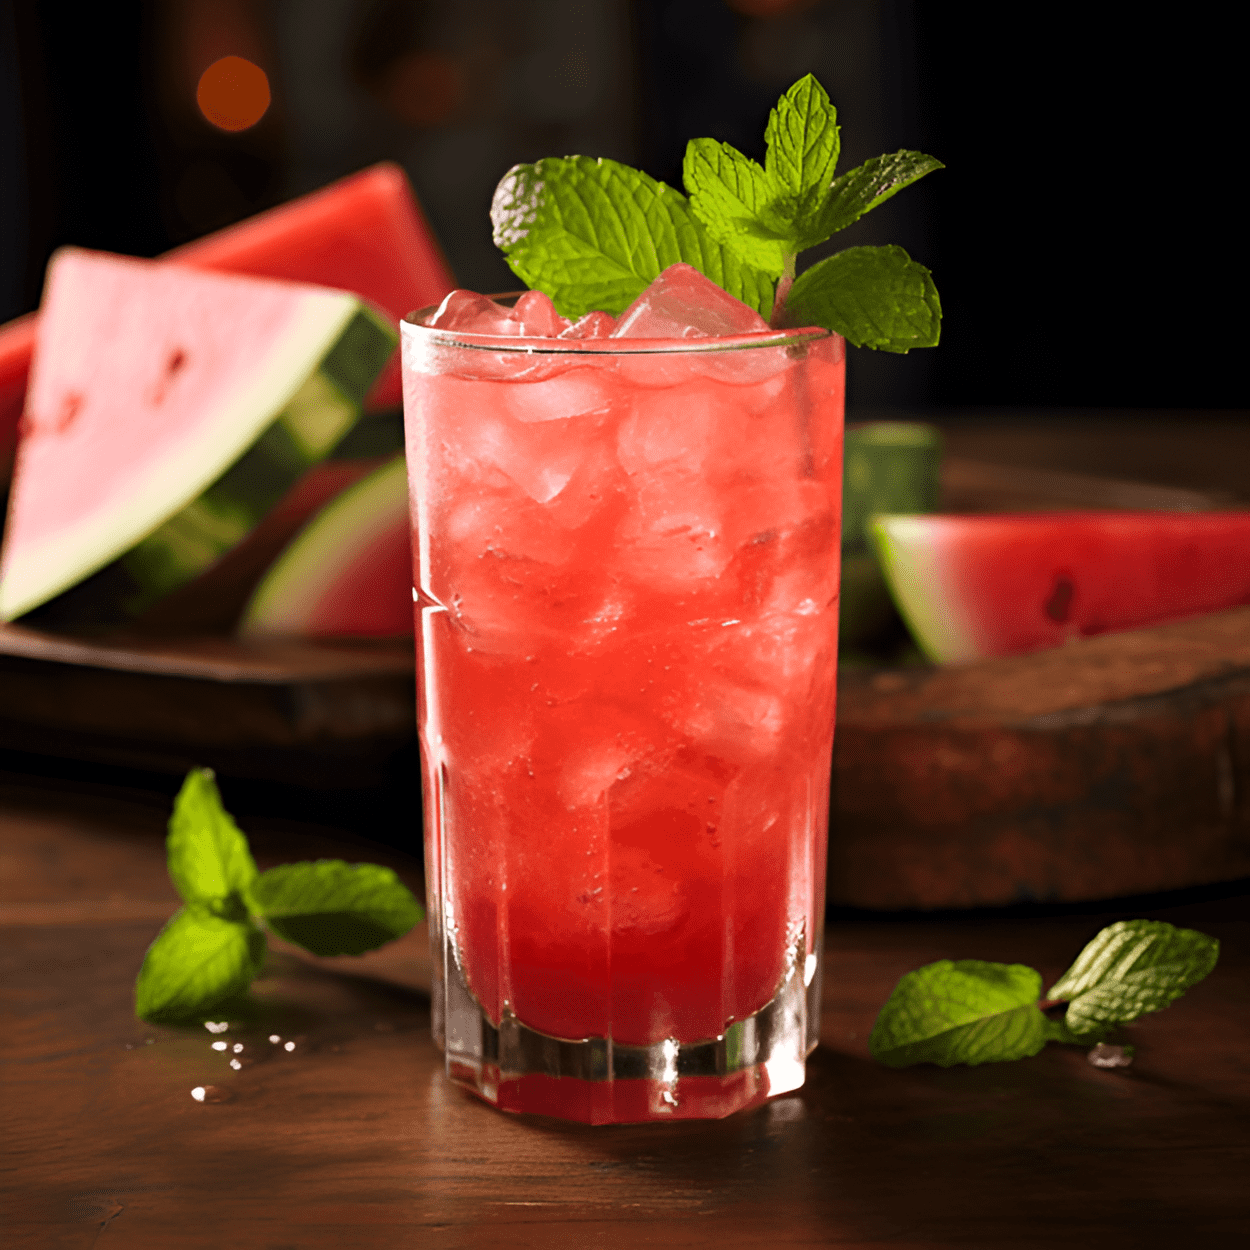 Watermelon Basil Mule Cocktail Recipe - The Watermelon Basil Mule is a refreshing, sweet, and slightly spicy cocktail. The watermelon provides a sweet and juicy base, while the basil adds a hint of earthiness. The ginger beer gives it a spicy kick, and the lime juice balances everything out with a tangy zing.